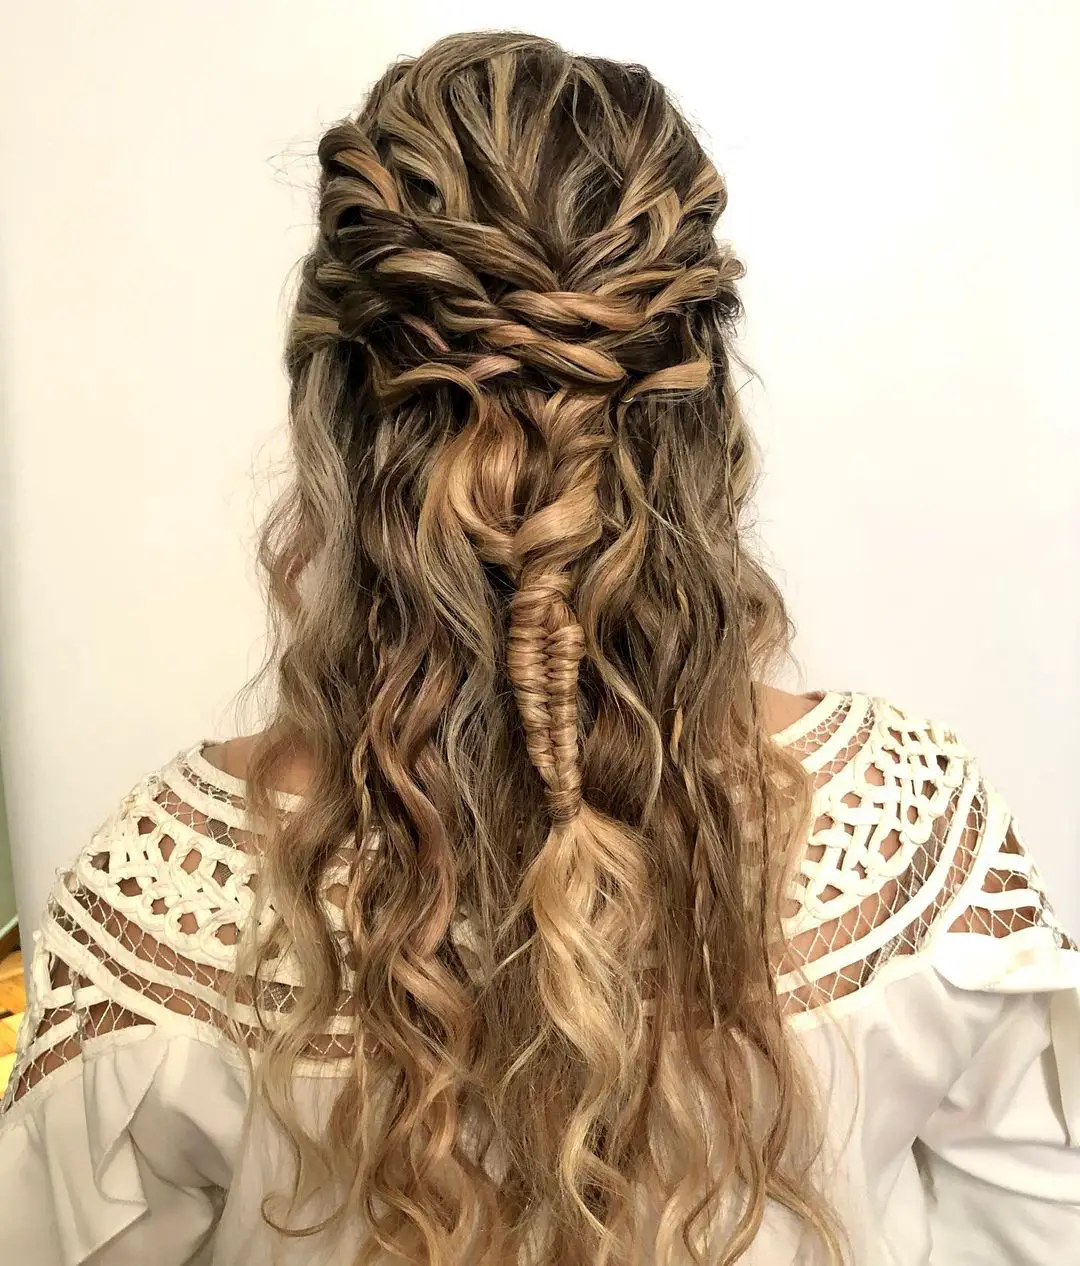 31-best-half-up-half-down-hairstyles-for-curly-hair Boho Twists with Fishplait Detail